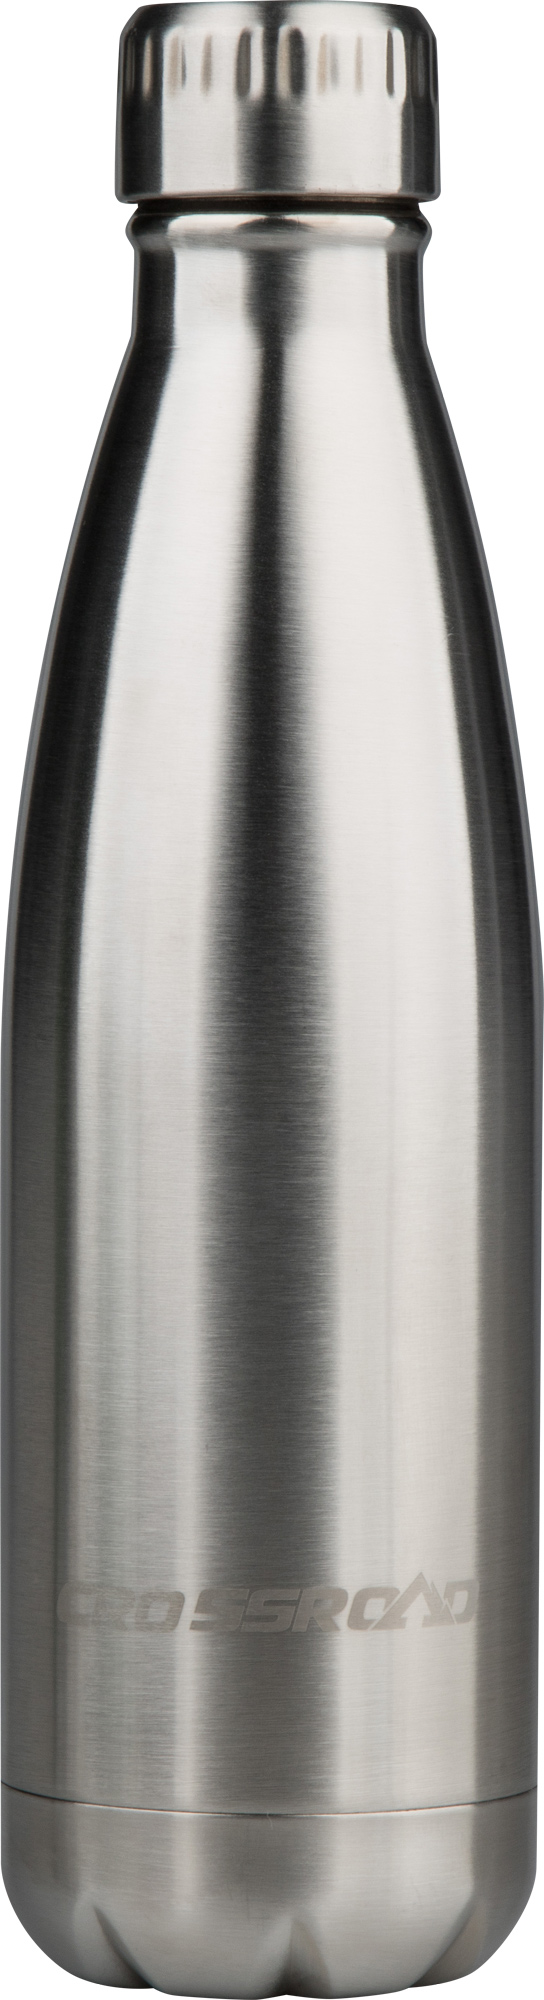 Steel thermo bottle